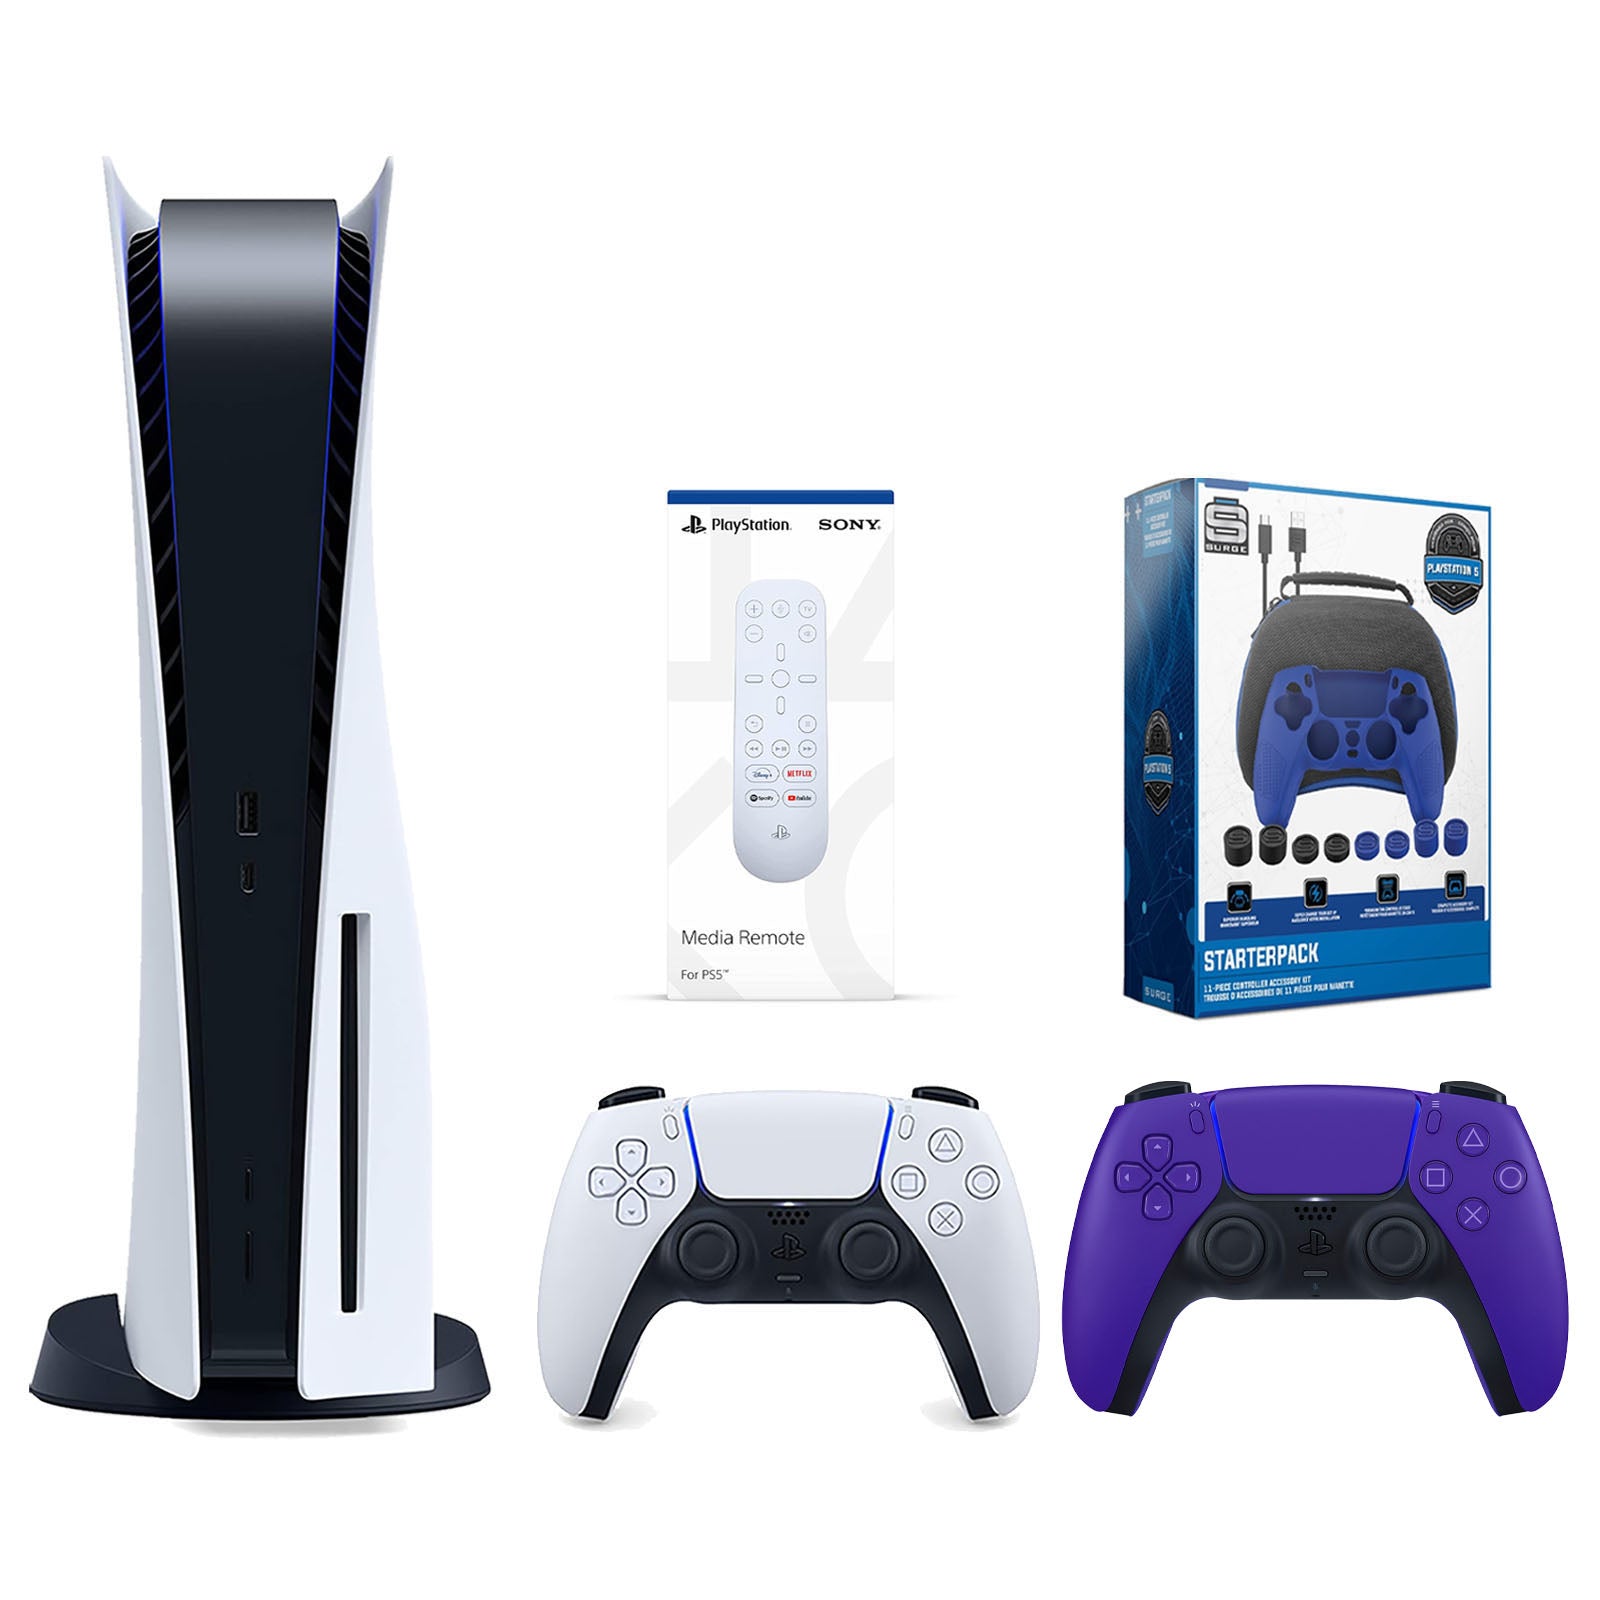 Sony Playstation 5 Disc Version Console with Extra Purple Controller, Media Remote and Surge Pro Gamer Starter Pack 11-Piece Accessory Bundle - Pro-Distributing